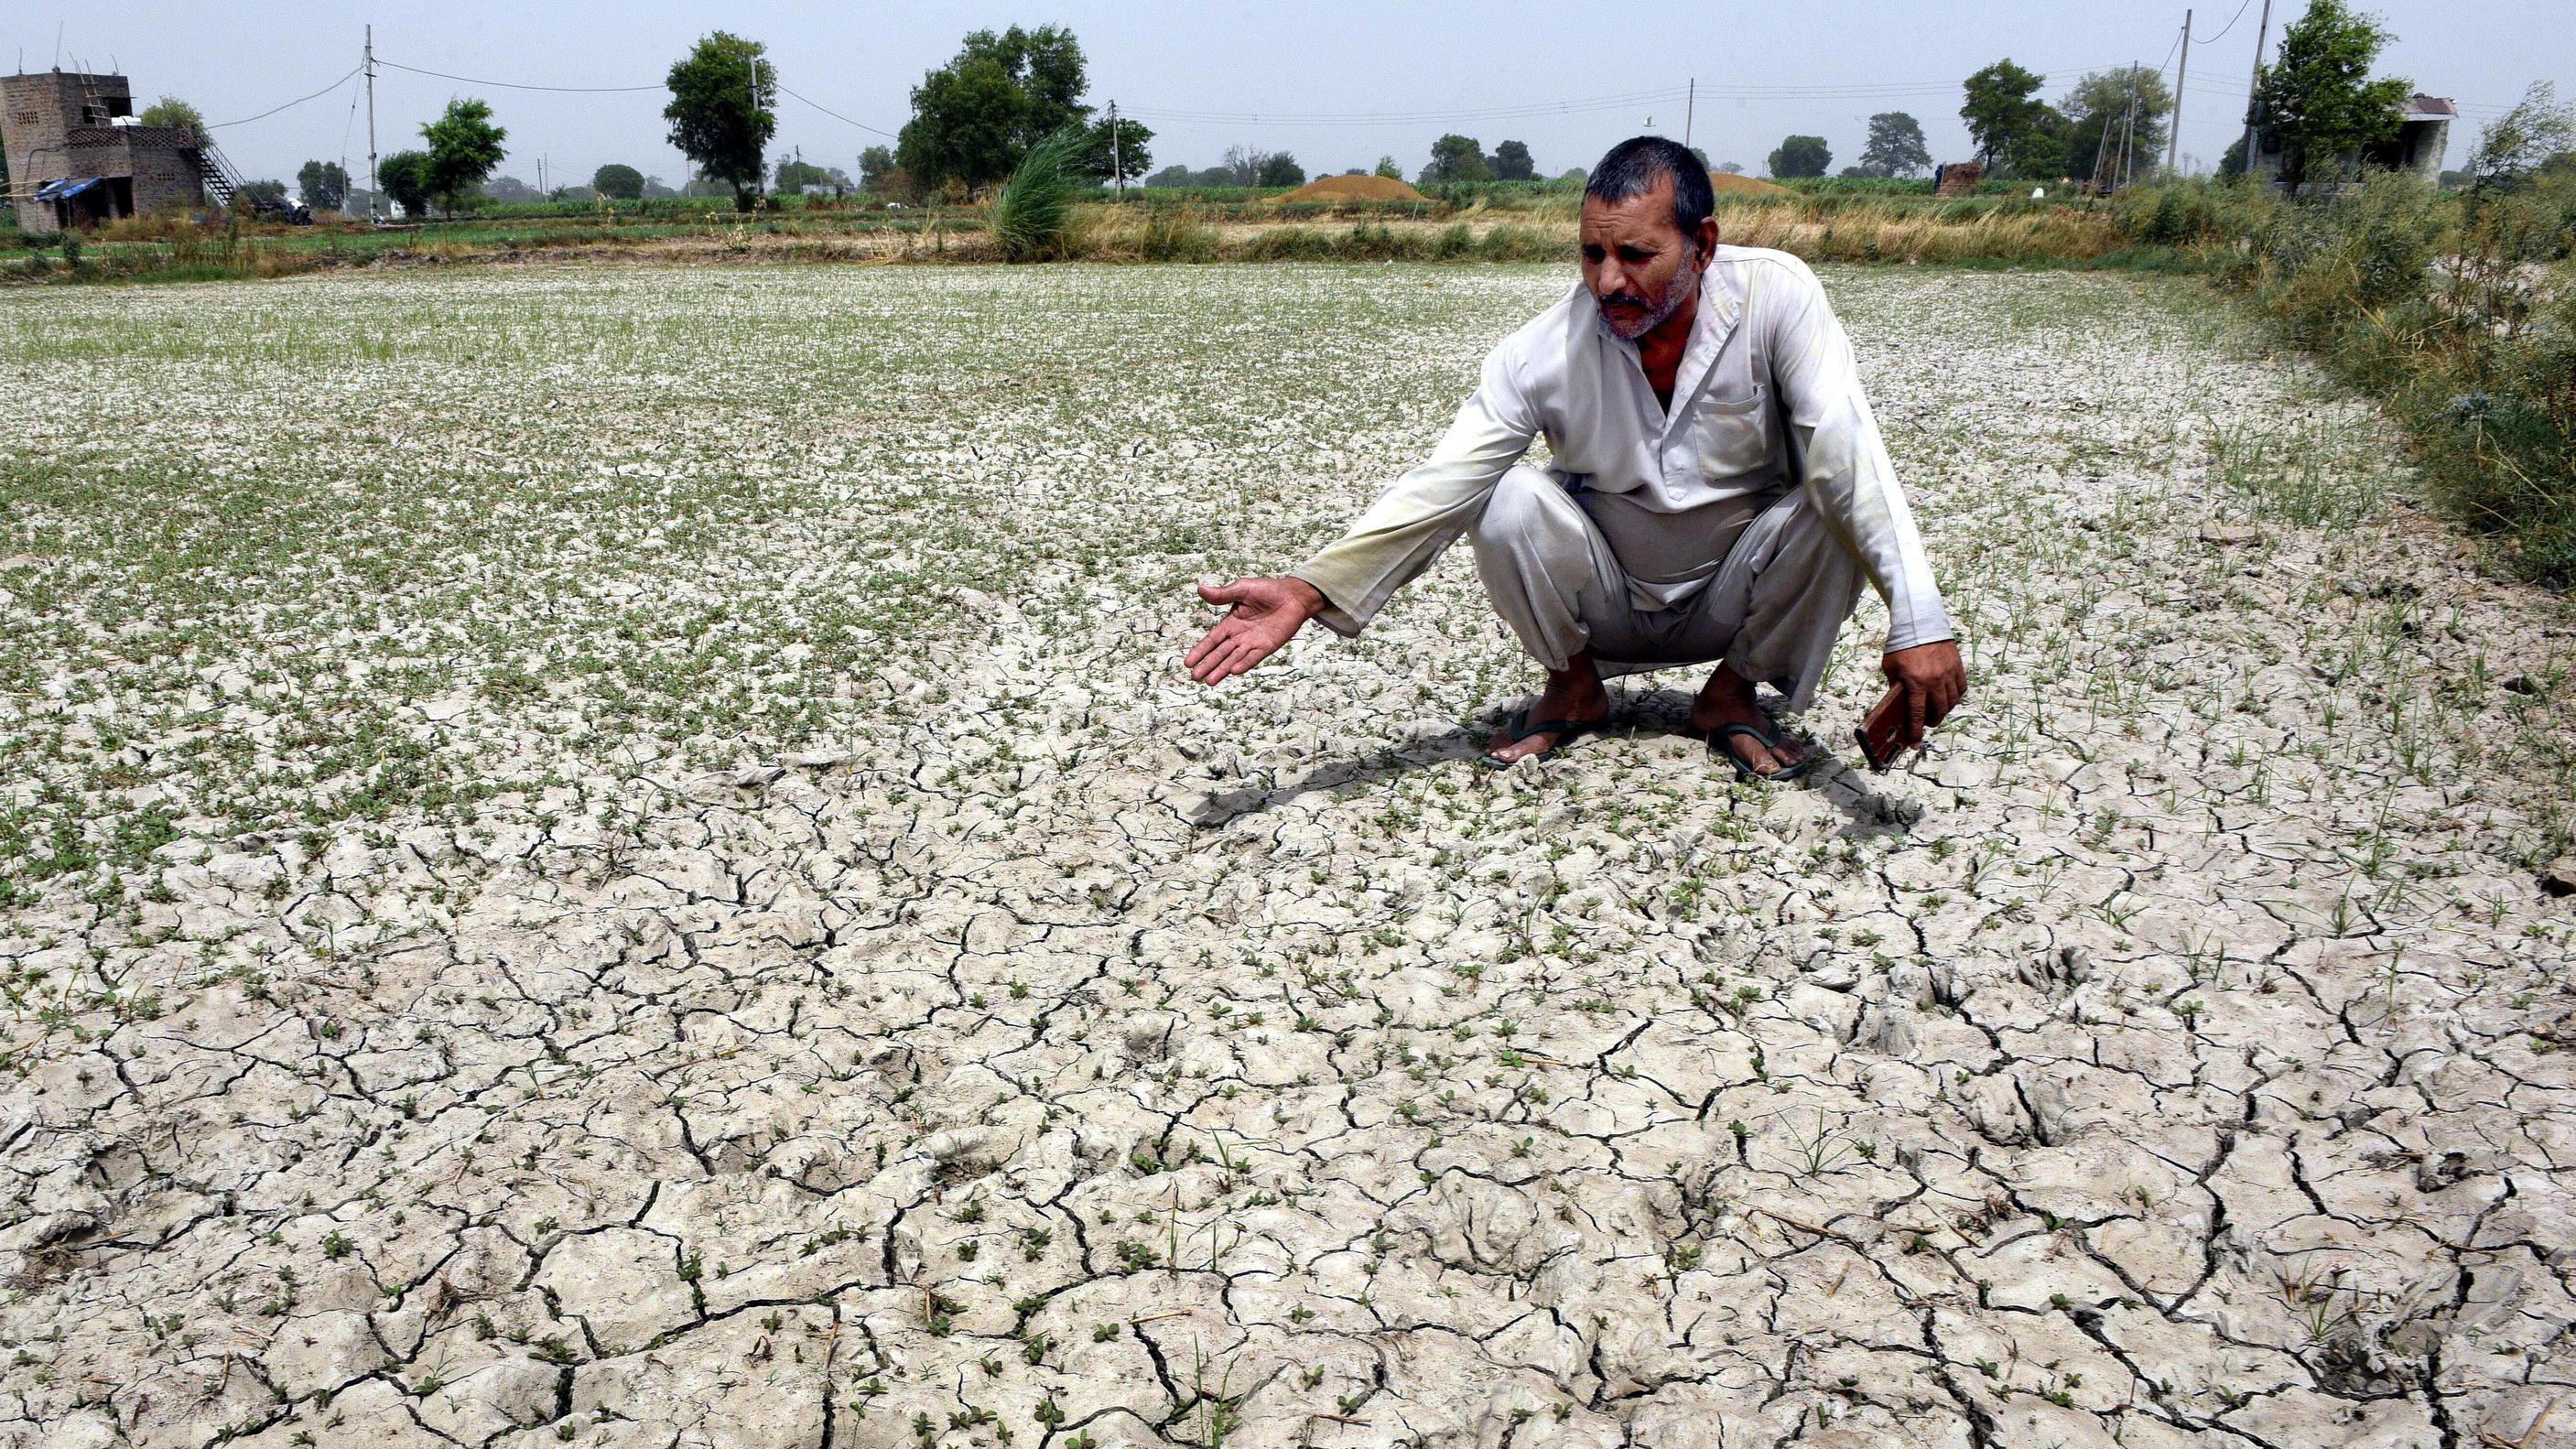 NEW DELHI, INDIA - MAY 16: A farmer shows a patch of the parched of field at Mungeshpur on May 16, 2022 in New Delhi, India. Mungeshpur was the hottest place in India on Sunday, with the maximum temperature 49.2 degrees Celsius. Photo by Arvind Yadav